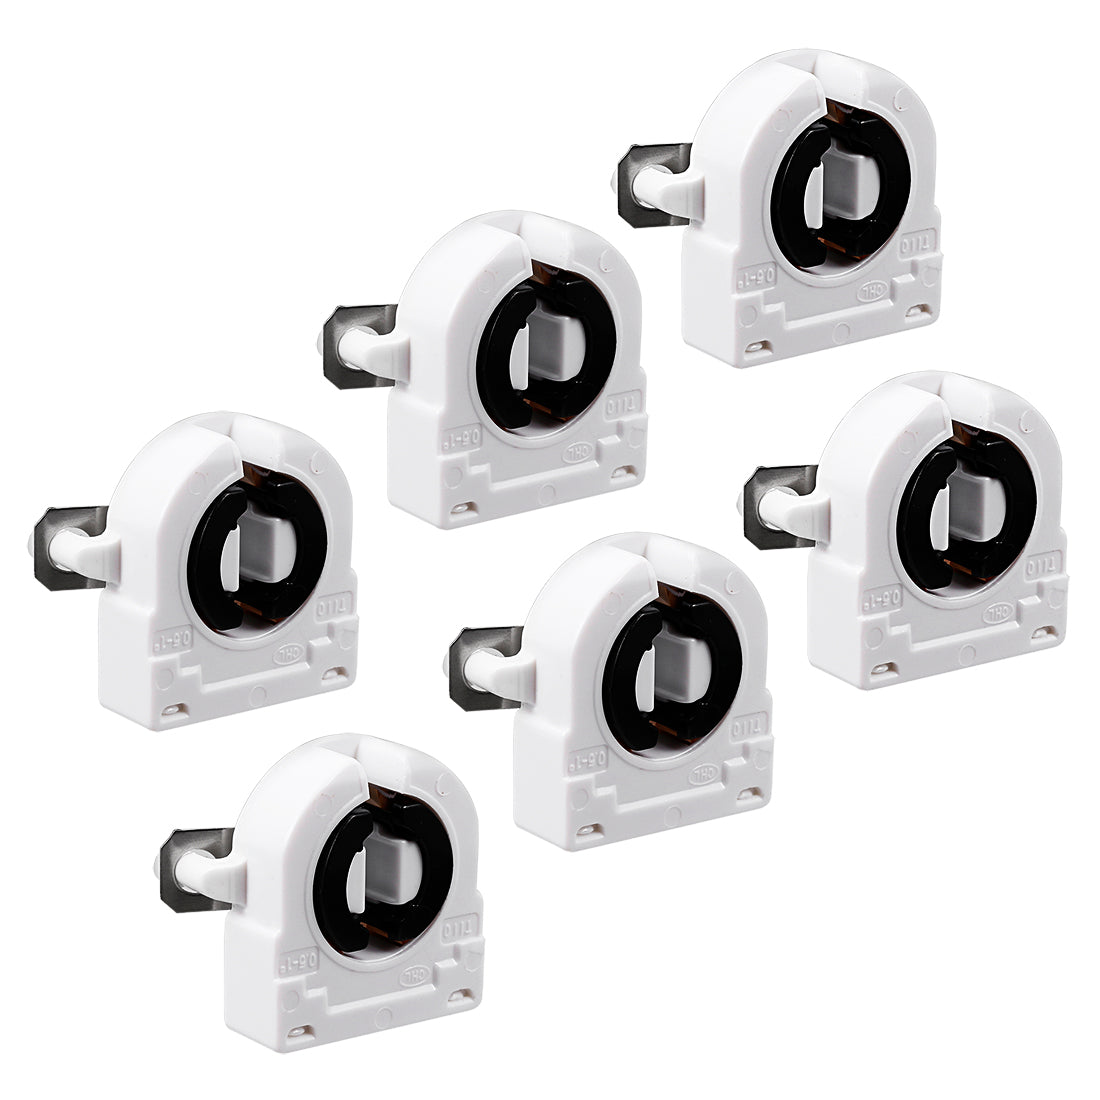 uxcell Uxcell 6 Pcs 2A T8 Socket G13 Base Fluorescent Lamp Holder Light Accessory White